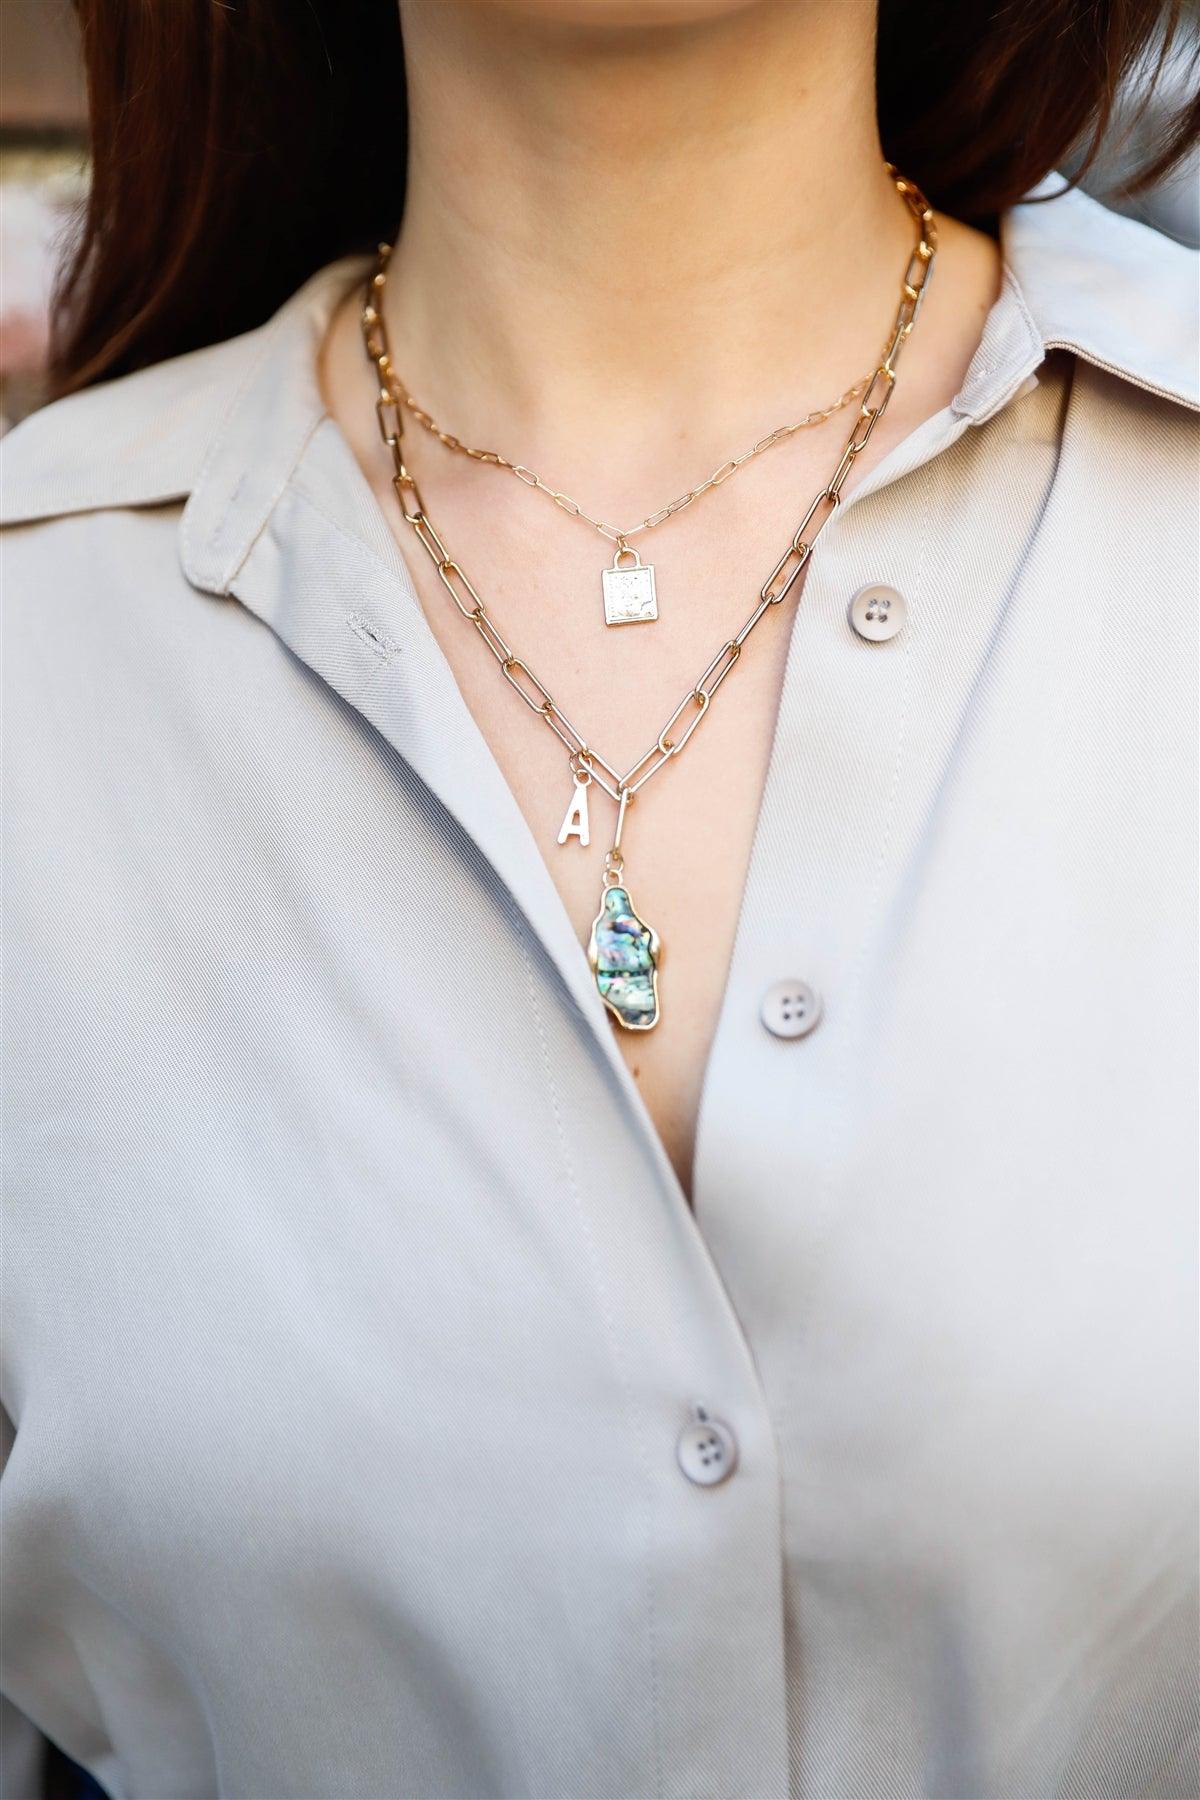 Gold Double Paper Clip Chain With Abalone Asymmetrical Pendant And Rectangle & "A" Letter Charms Necklace /3 Pieces